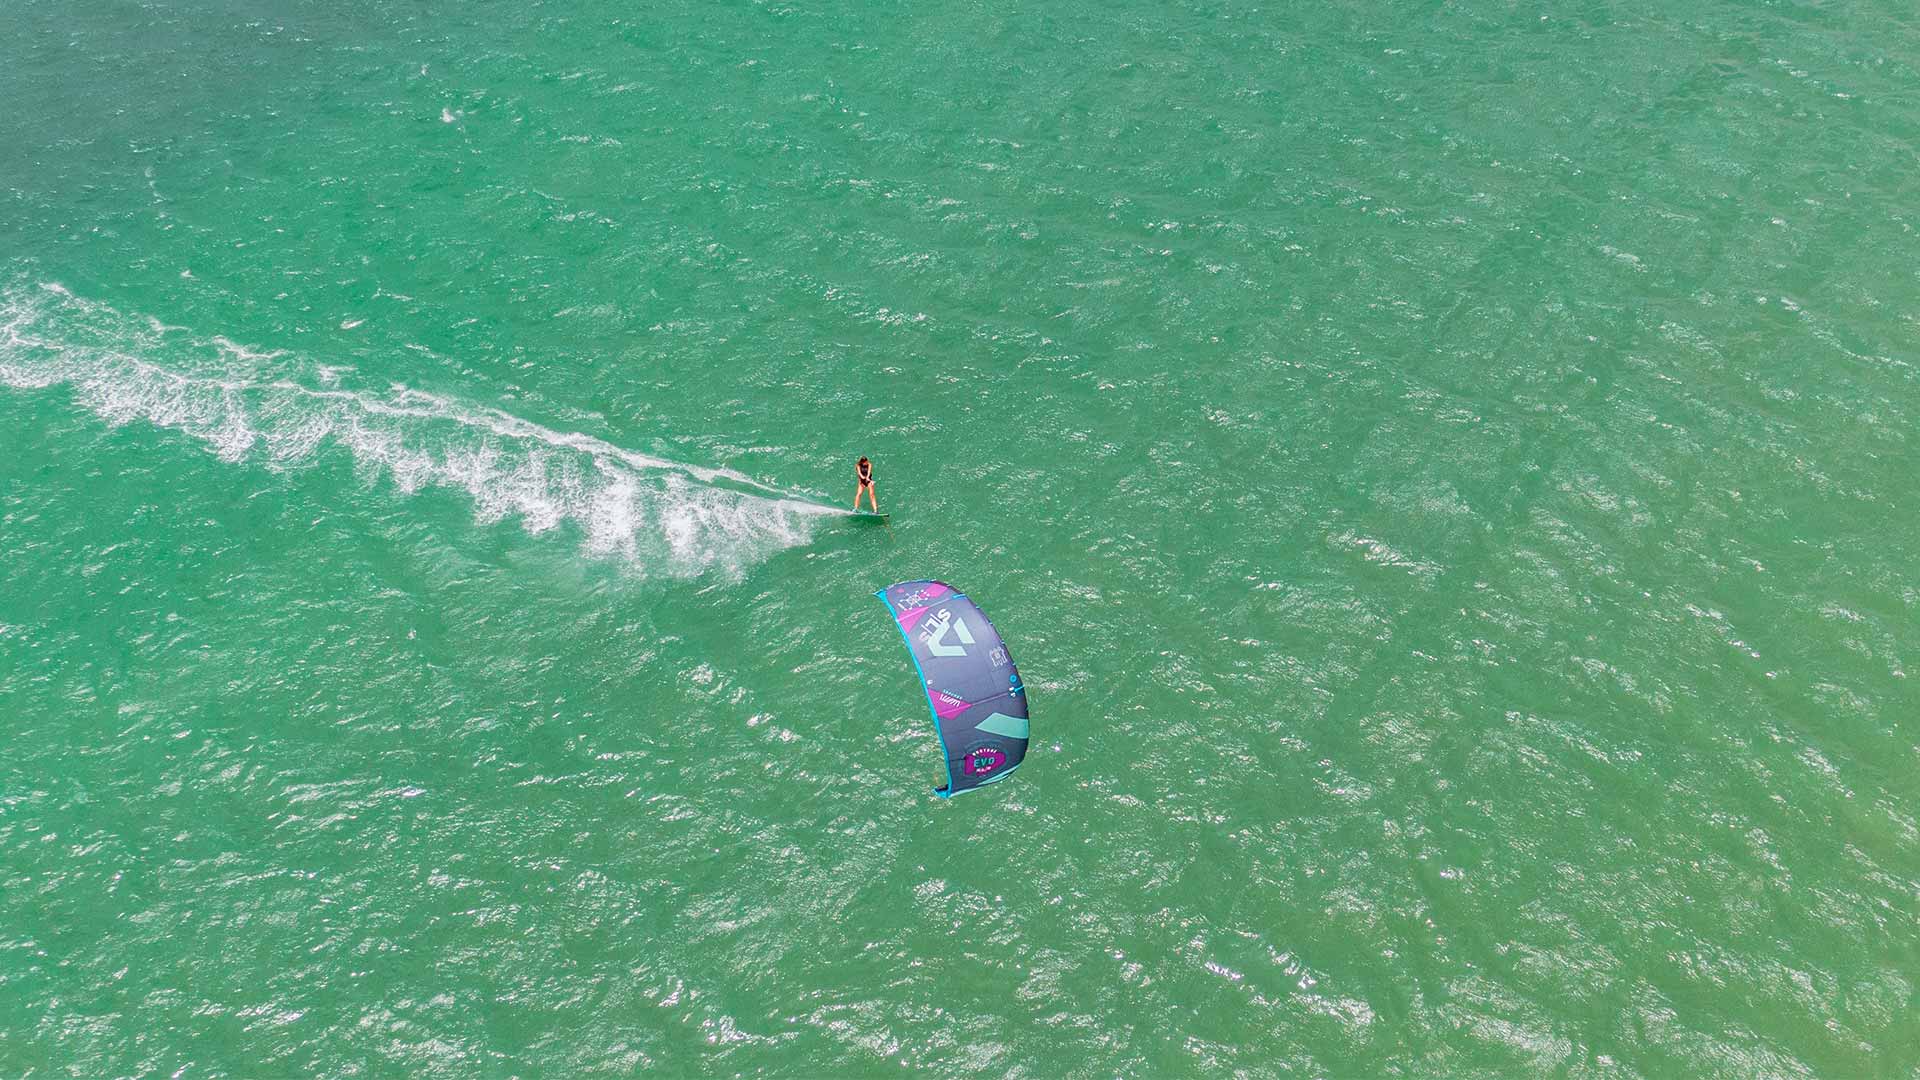 View from the sky of a kitesurfer riding on turquise water of Dakhla Lagoon